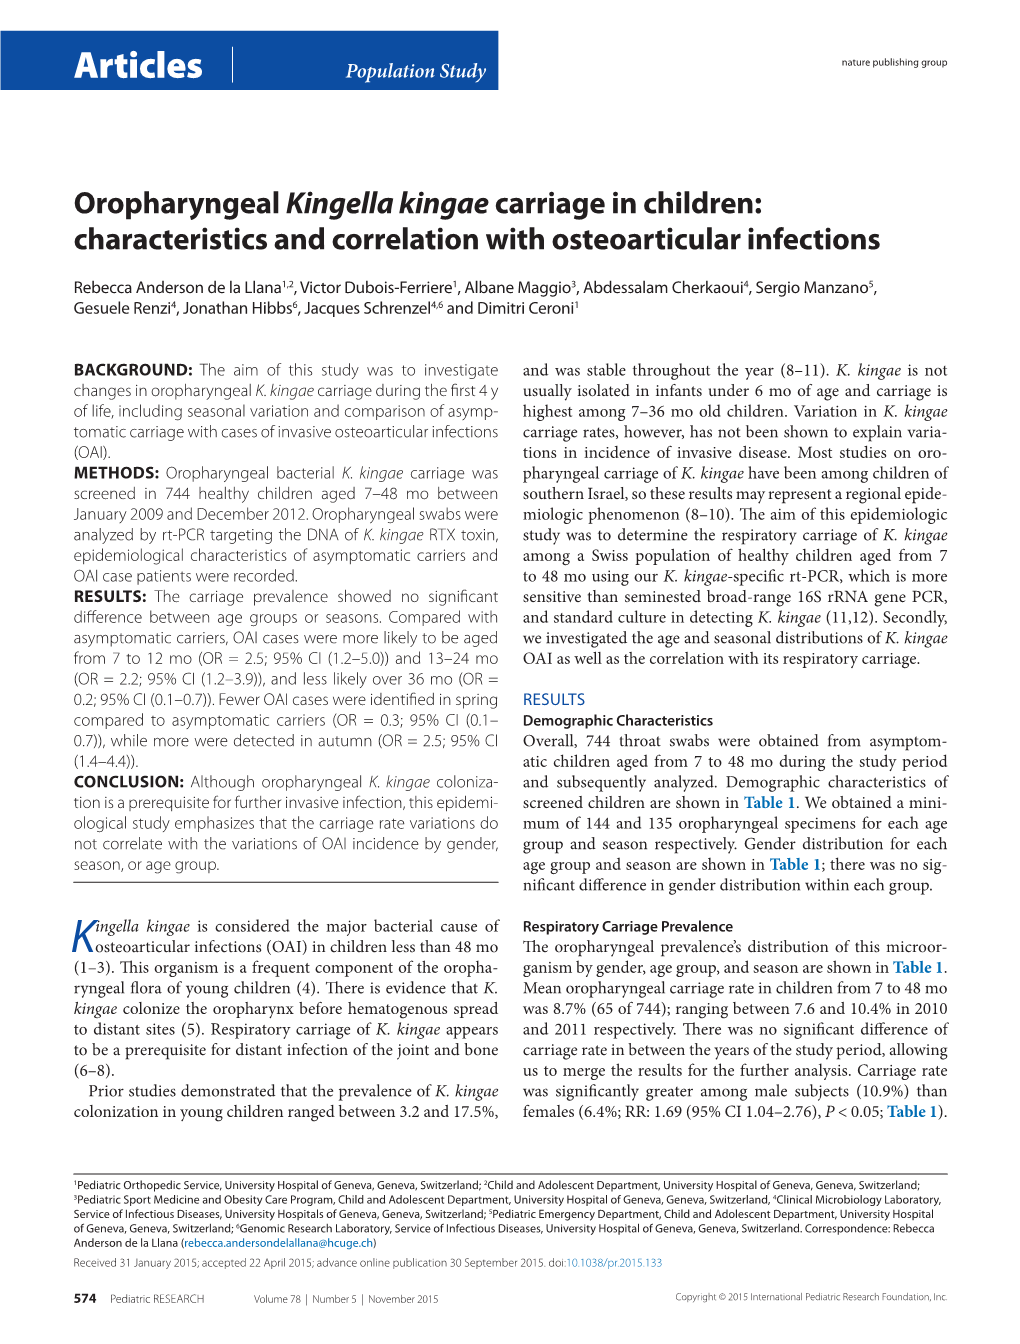 Kingella Kingae Carriage in Children: Characteristics and Correlation with Osteoarticular Infections